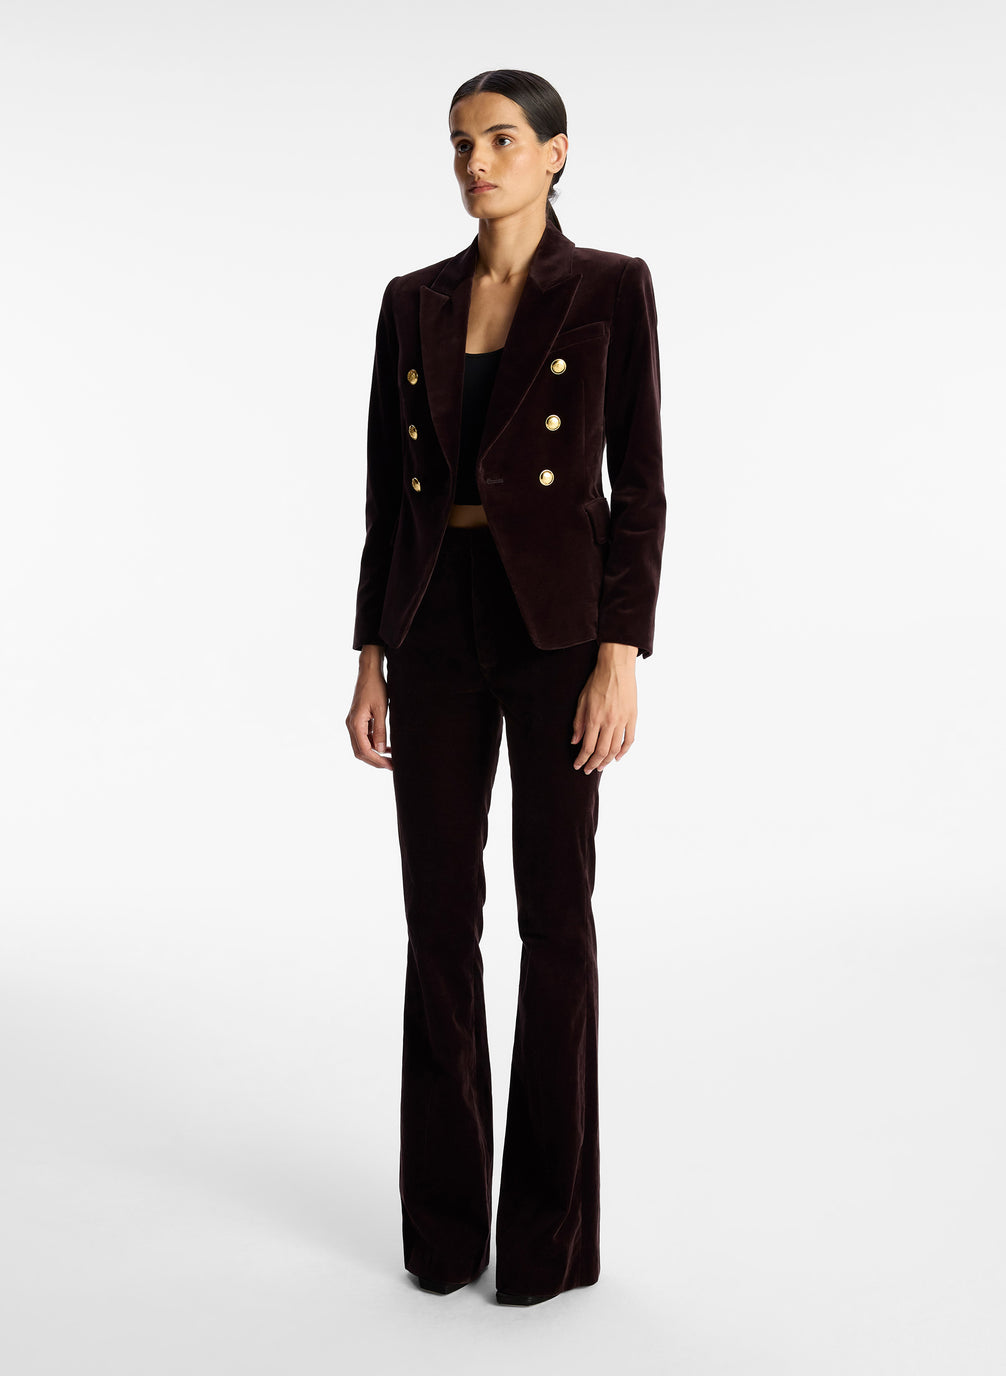 side view of woman wearing brown velvet jacket with gold buttons and brown velvet flared pants